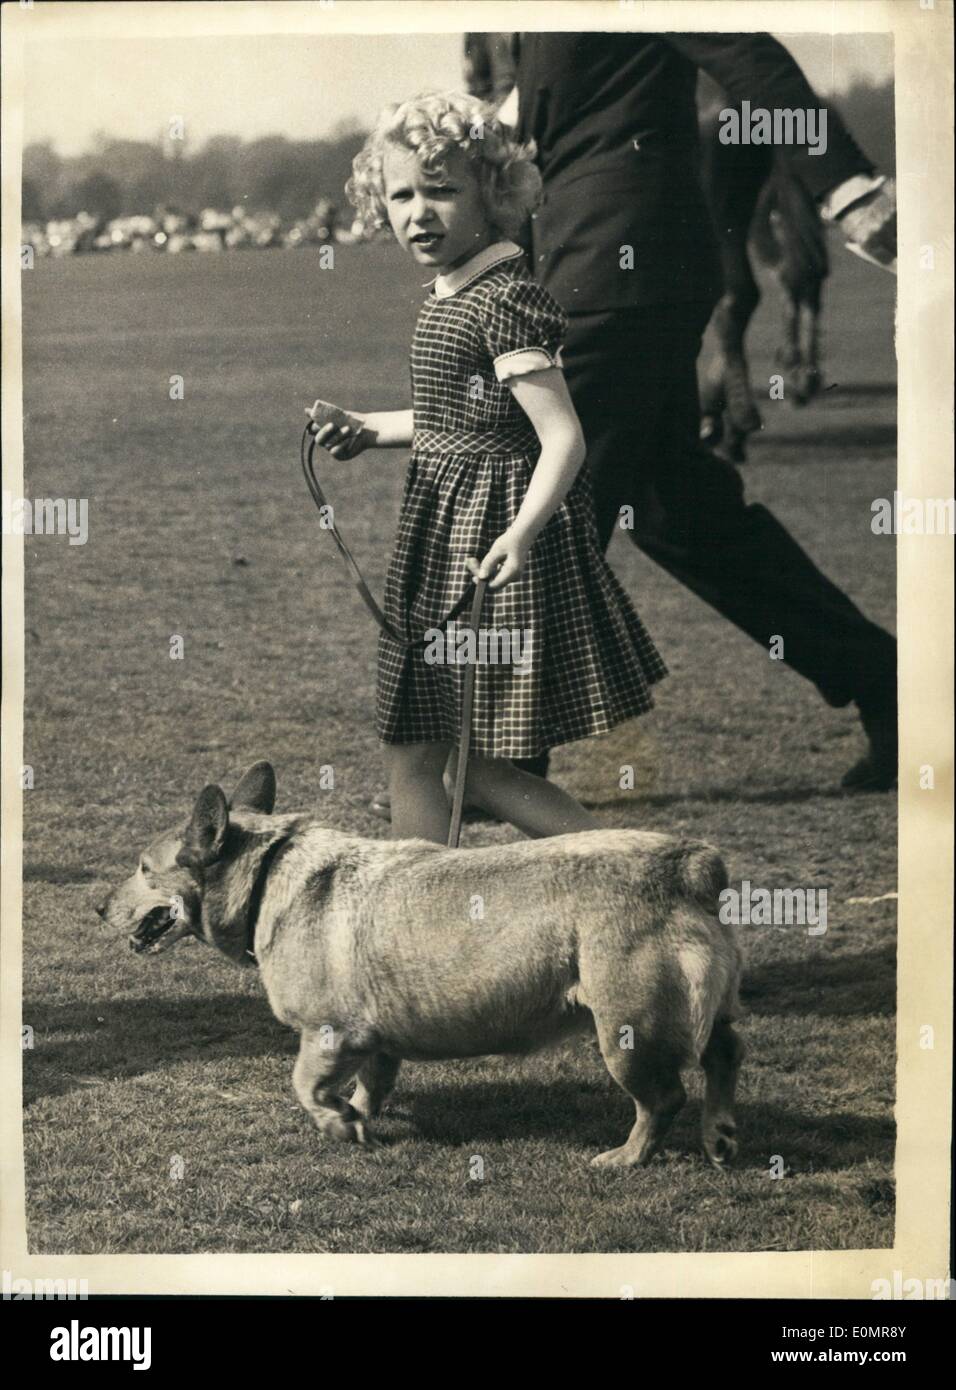 May 05, 1956 - The Duke of Edinburgh plays polo at Windsor the Queen and the royal children attend.: The Duke of Edinburgh played polo on Smith's Lawn in Windsor Great Park this afternoon. The Queen and the two Royal children watched the games. Photo shows Princess Anne take a charge of one of the corgis while watching the polo this afternoon. Stock Photo